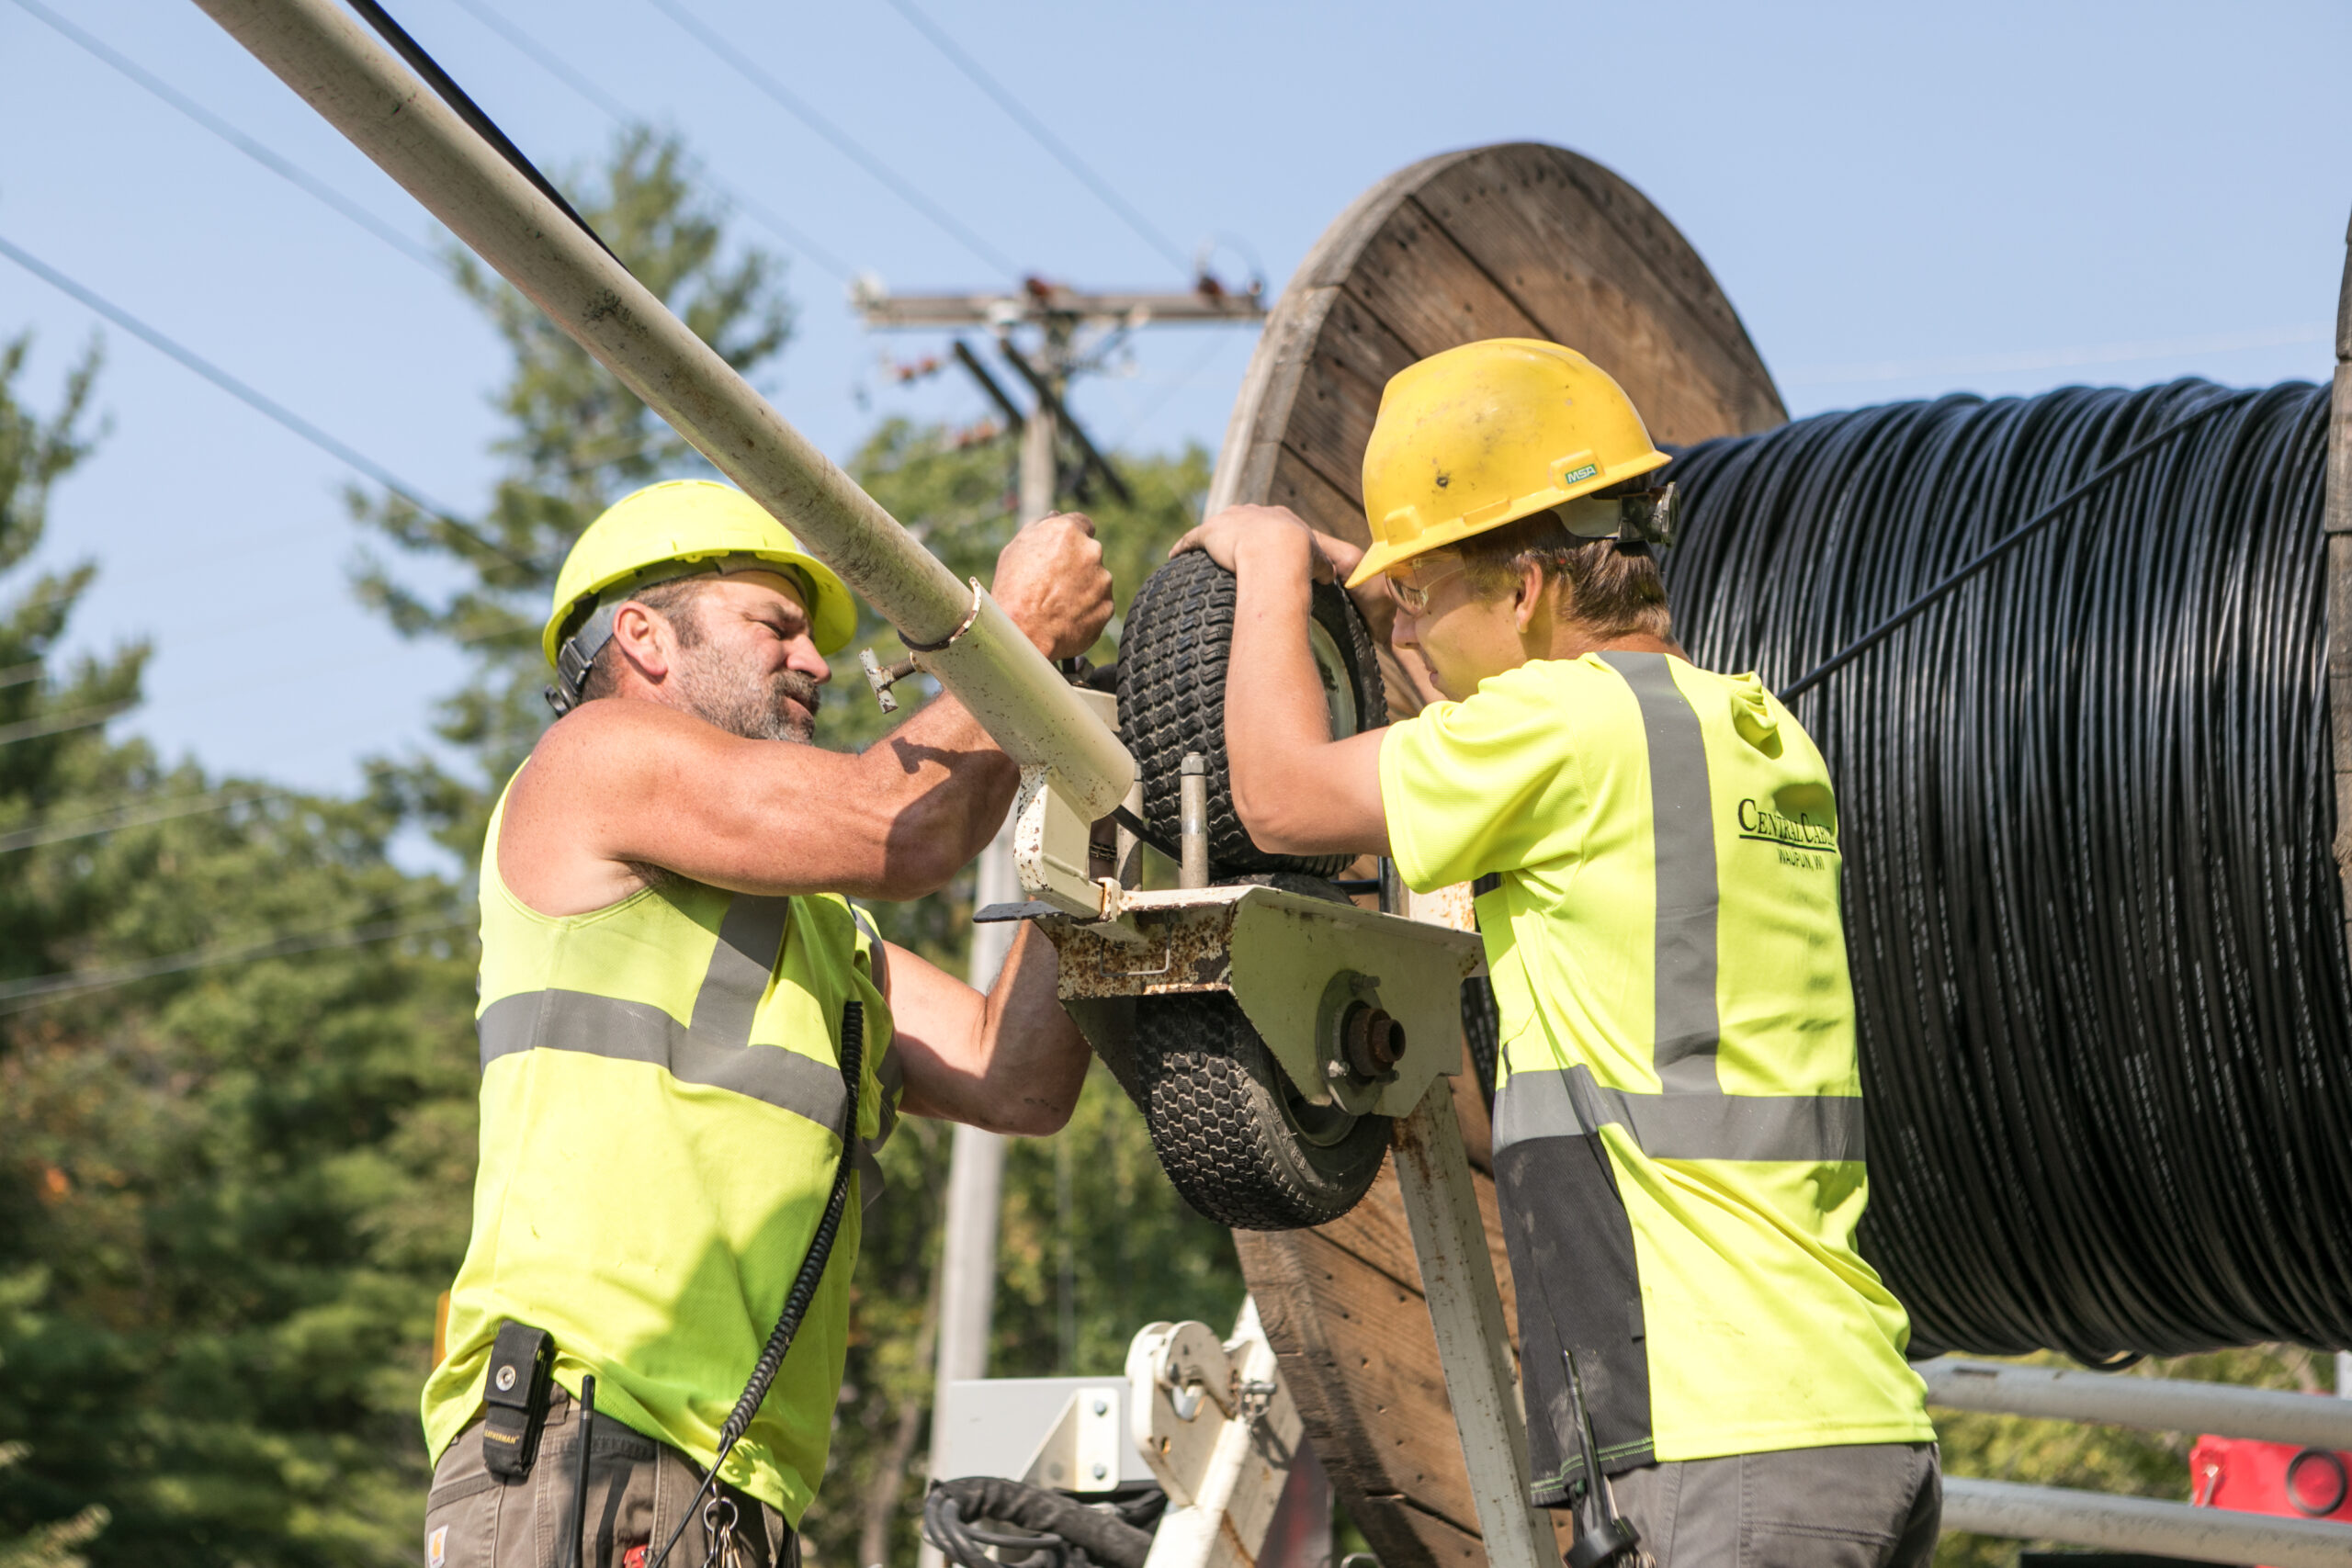 Central Cable workers unrolling cable wires